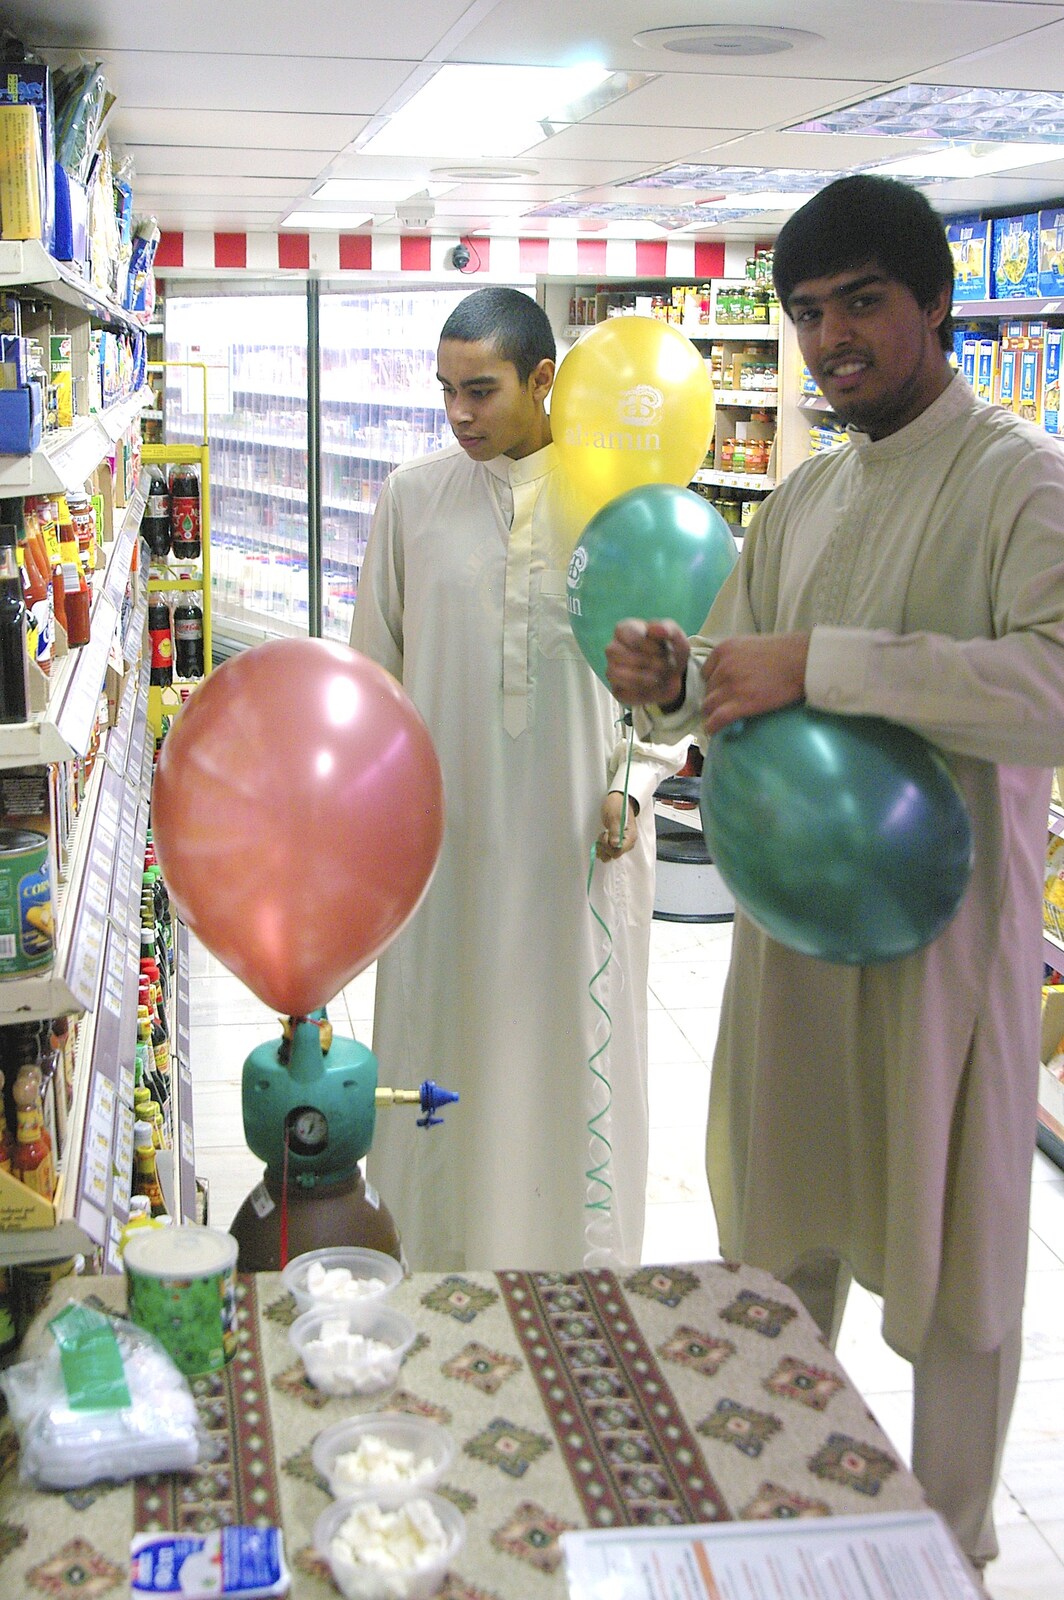 The Al Amin dudes inflate balloons with helium from The Winter Fair, Mill Road, Cambridge - 2nd December 2006